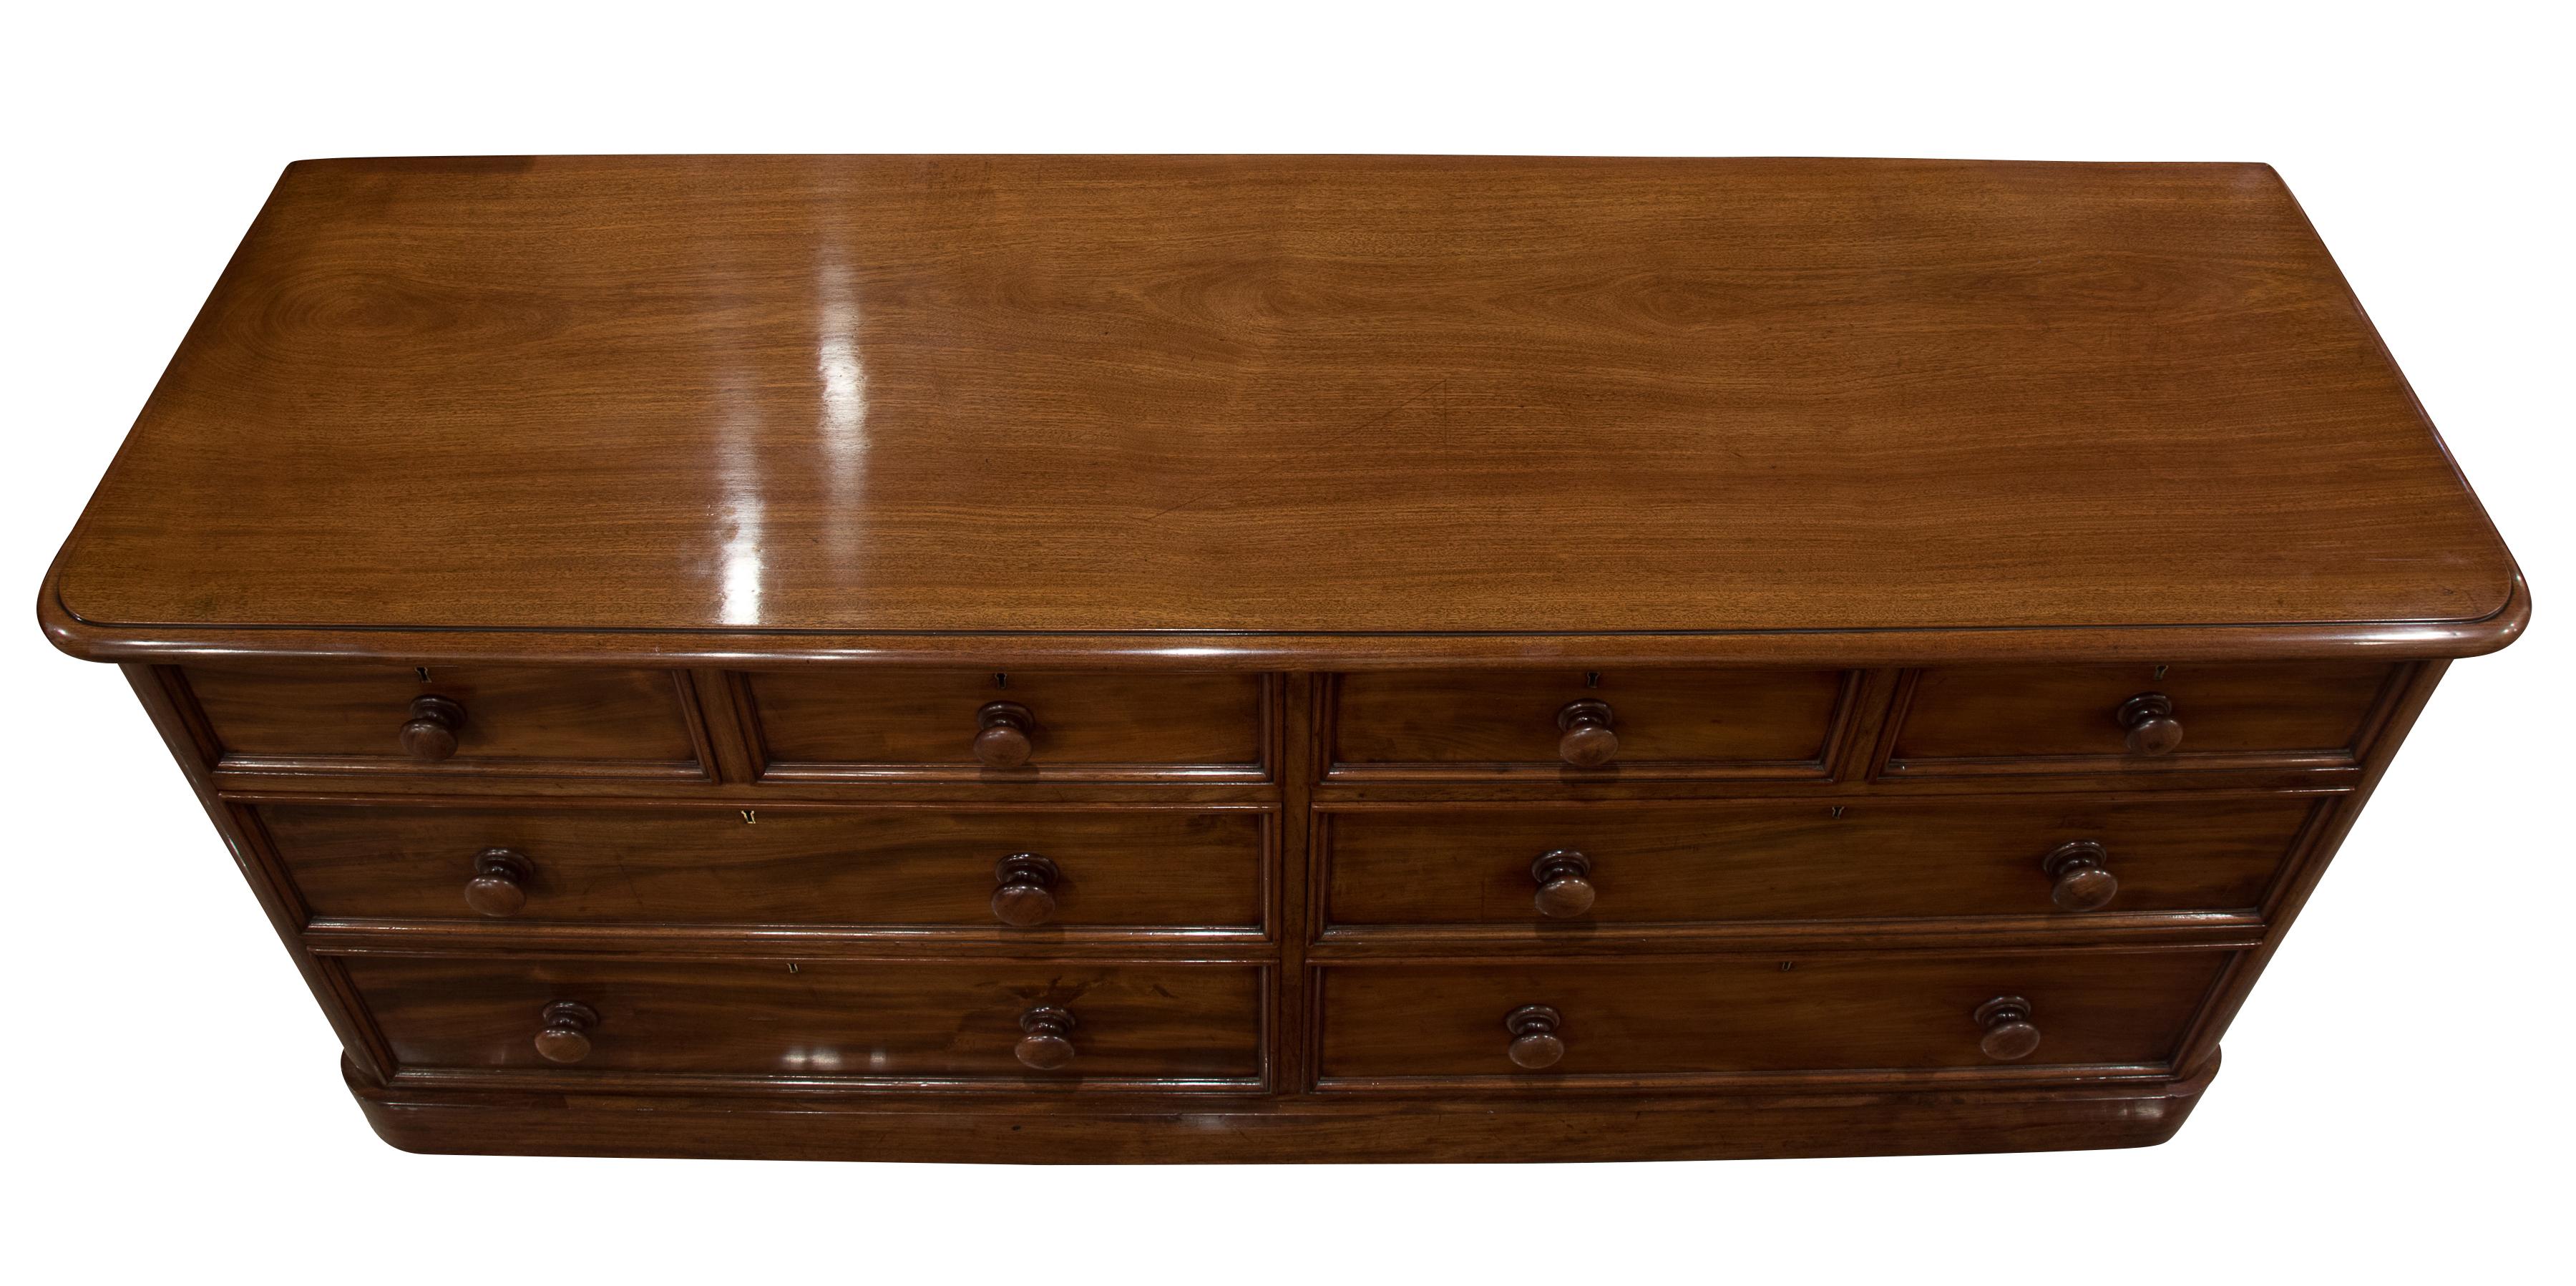 English Rare 19th Century Double Bank Chest of Drawers, circa 1850 For Sale